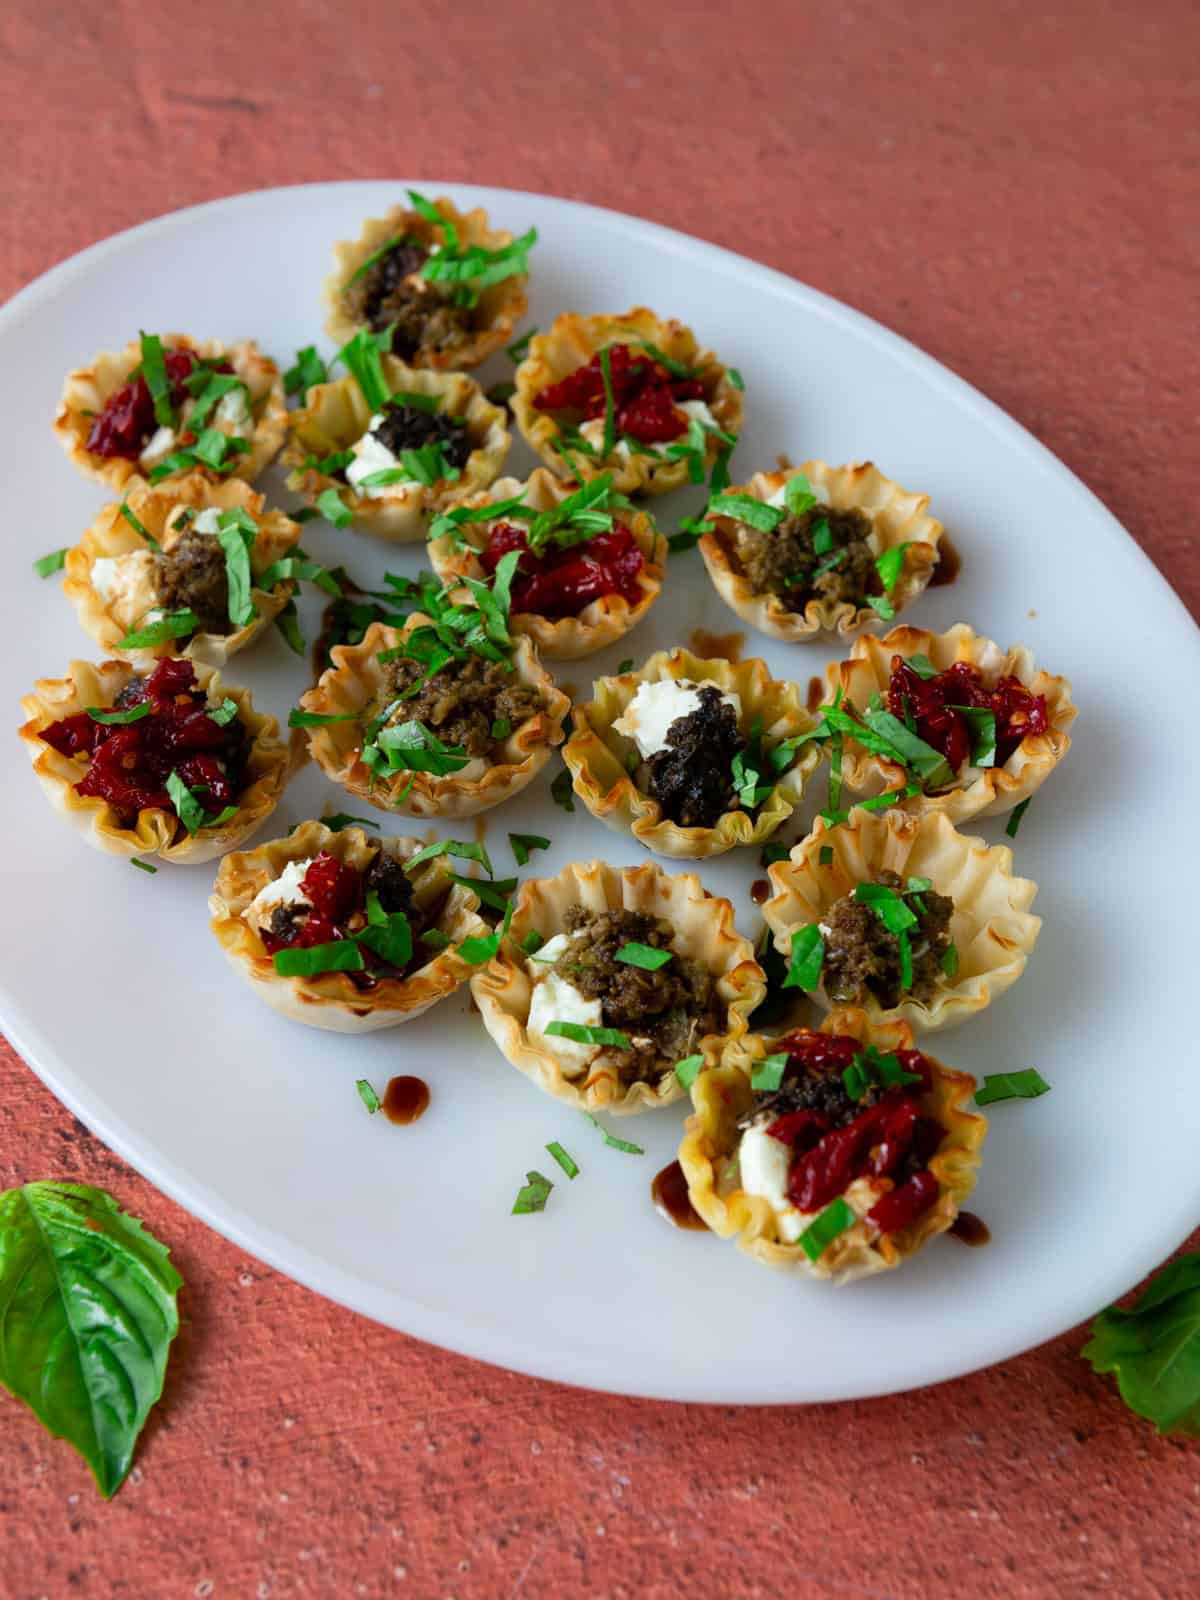 Savory phyllo appetizer with goat cheese, pesto, sun-dried tomatoes and olive tapenade.